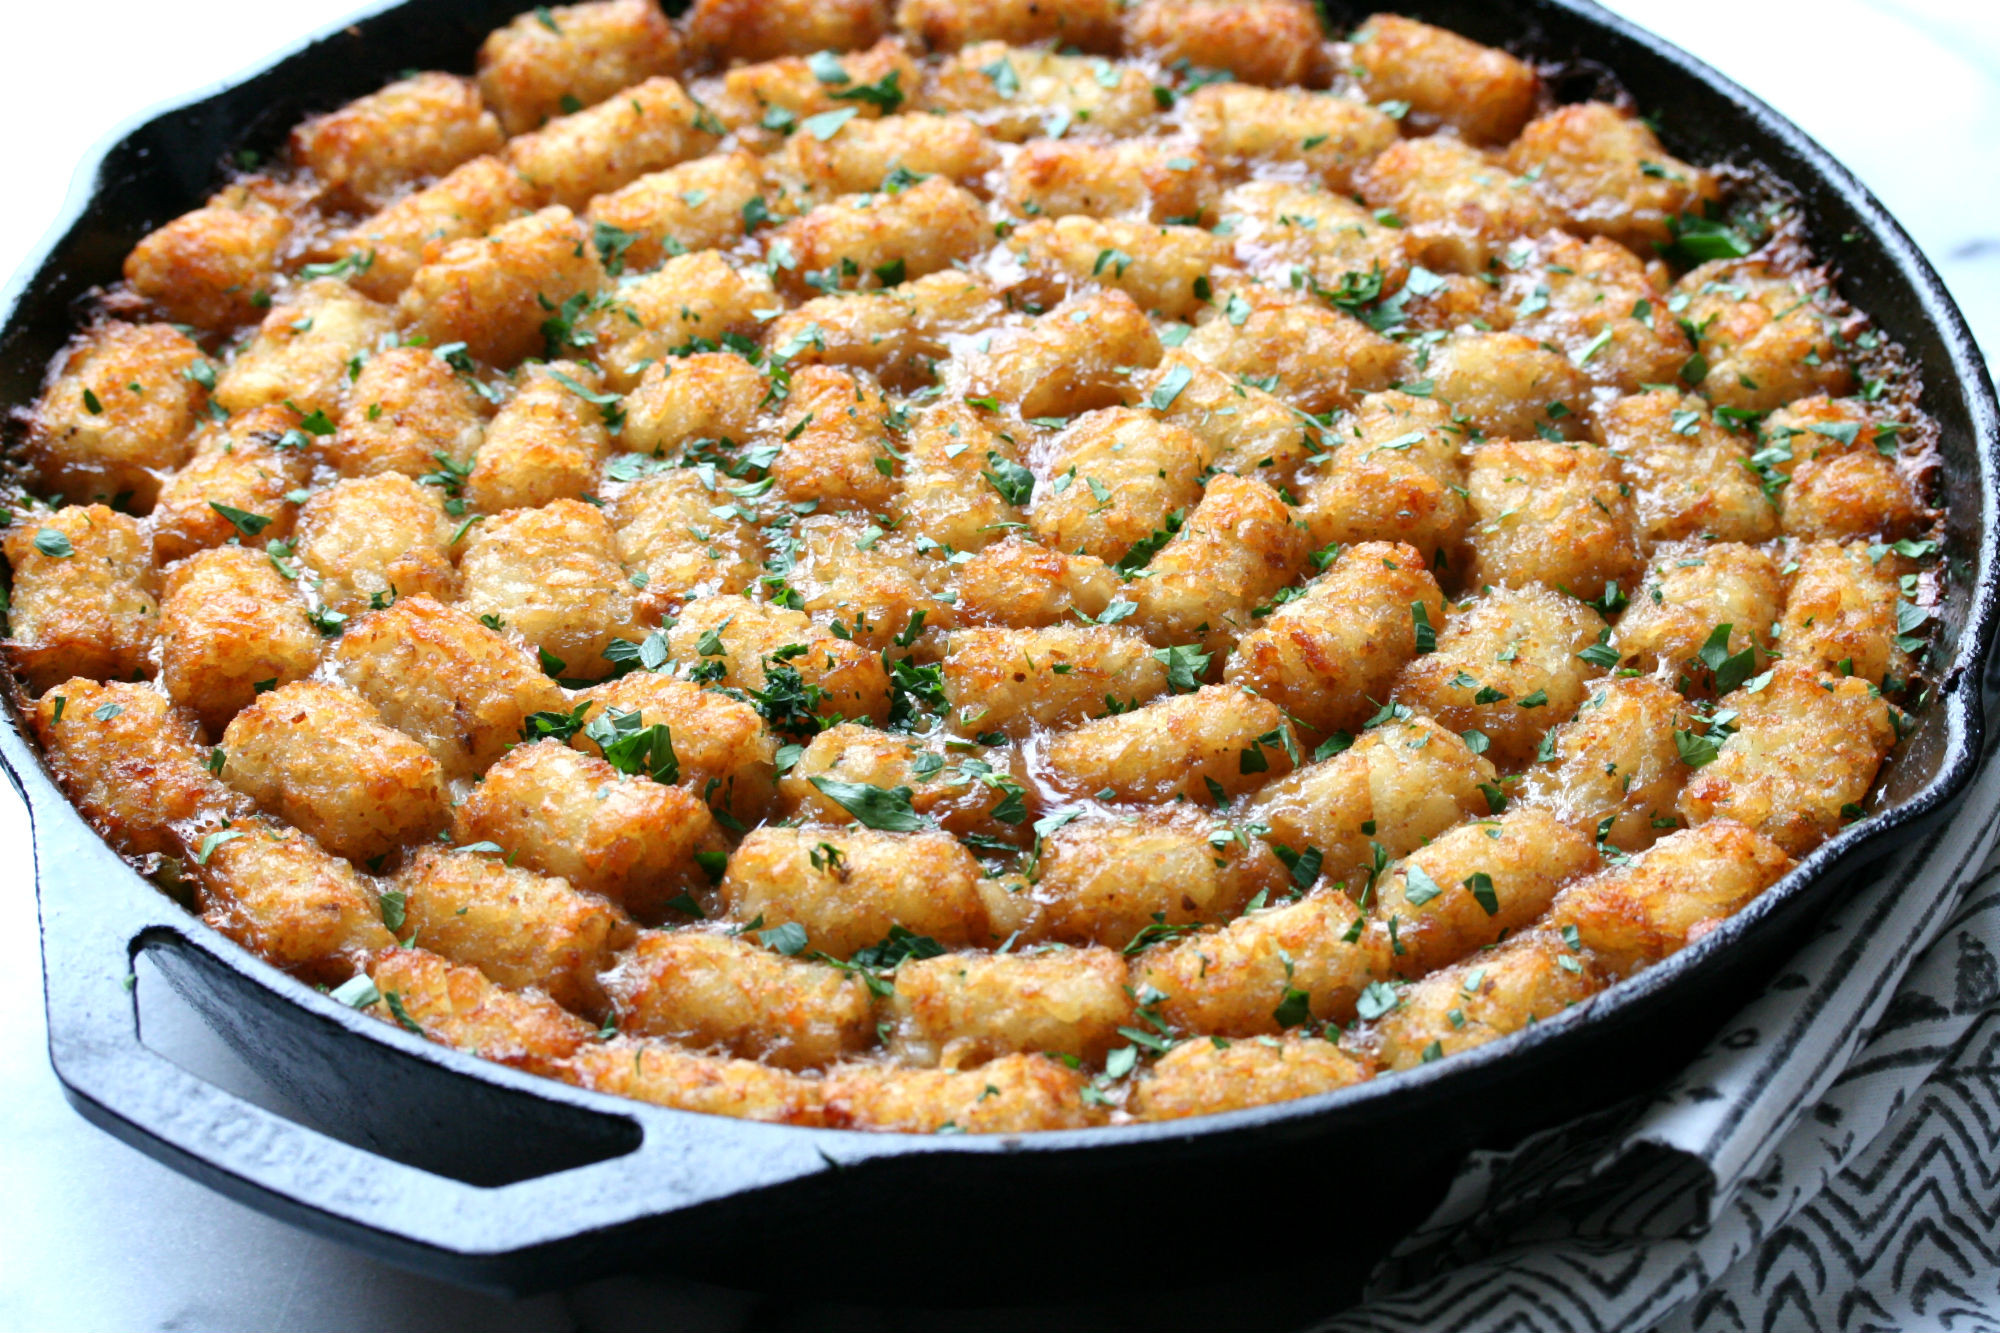 Tater Tot Casserole With Corn
 Tater Tot Casserole Dash of Savory